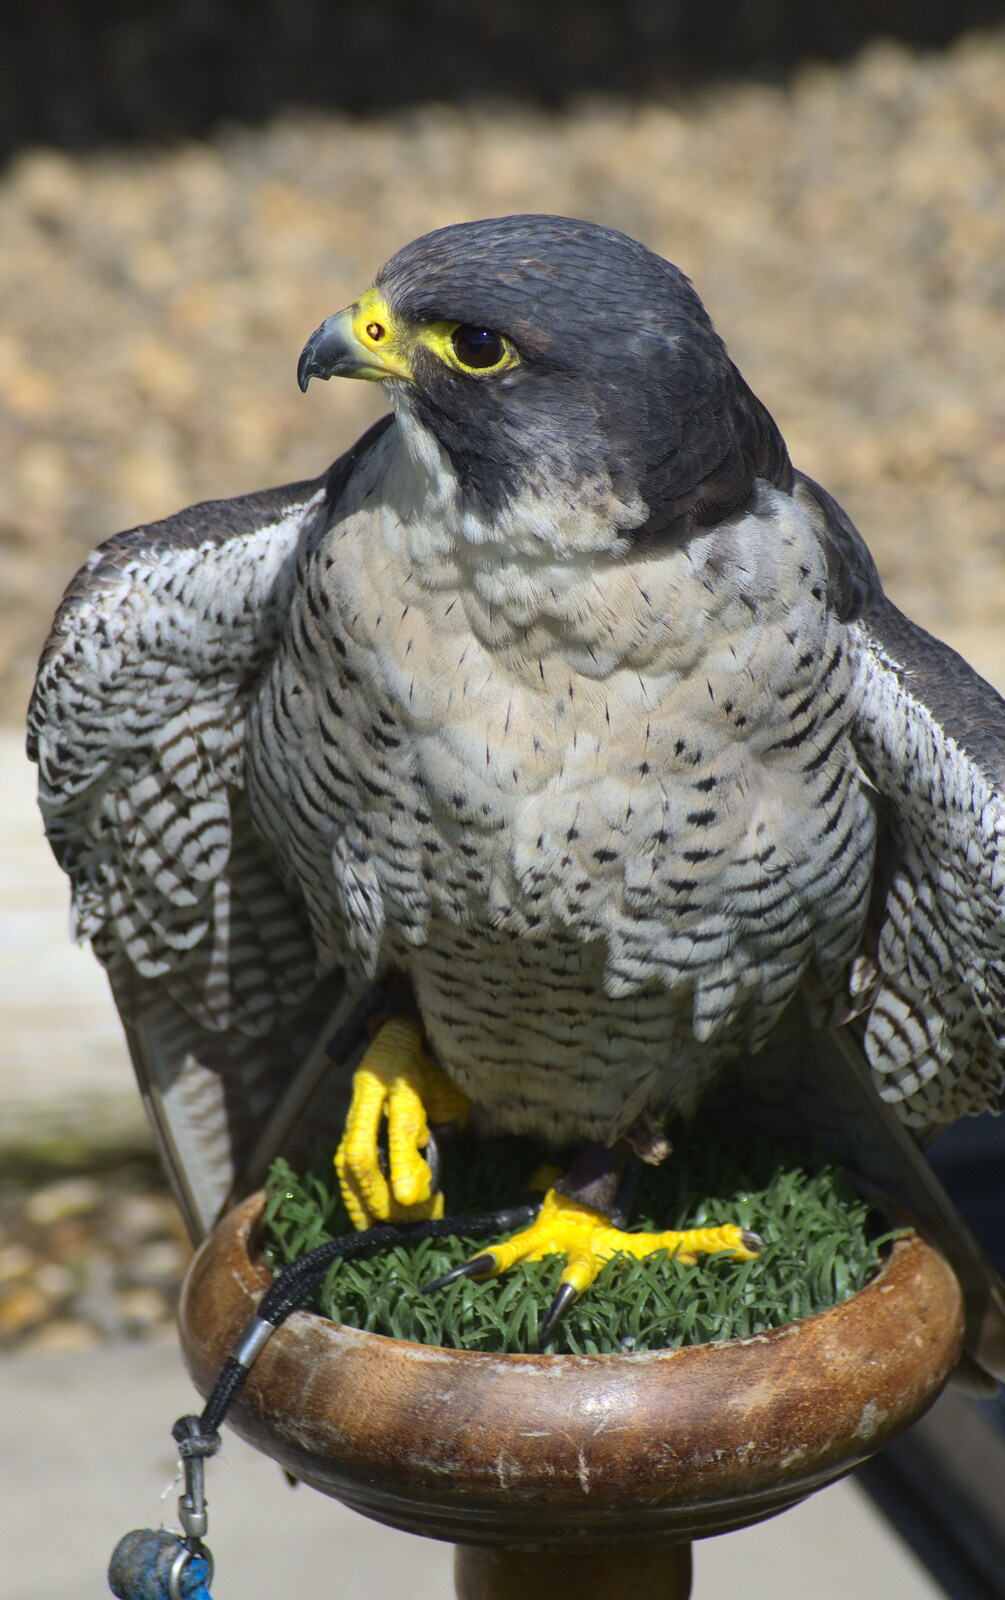 A Peregrine Falcon from Another Trip to Banham Zoo, Banham, Norfolk - 6th June 2012